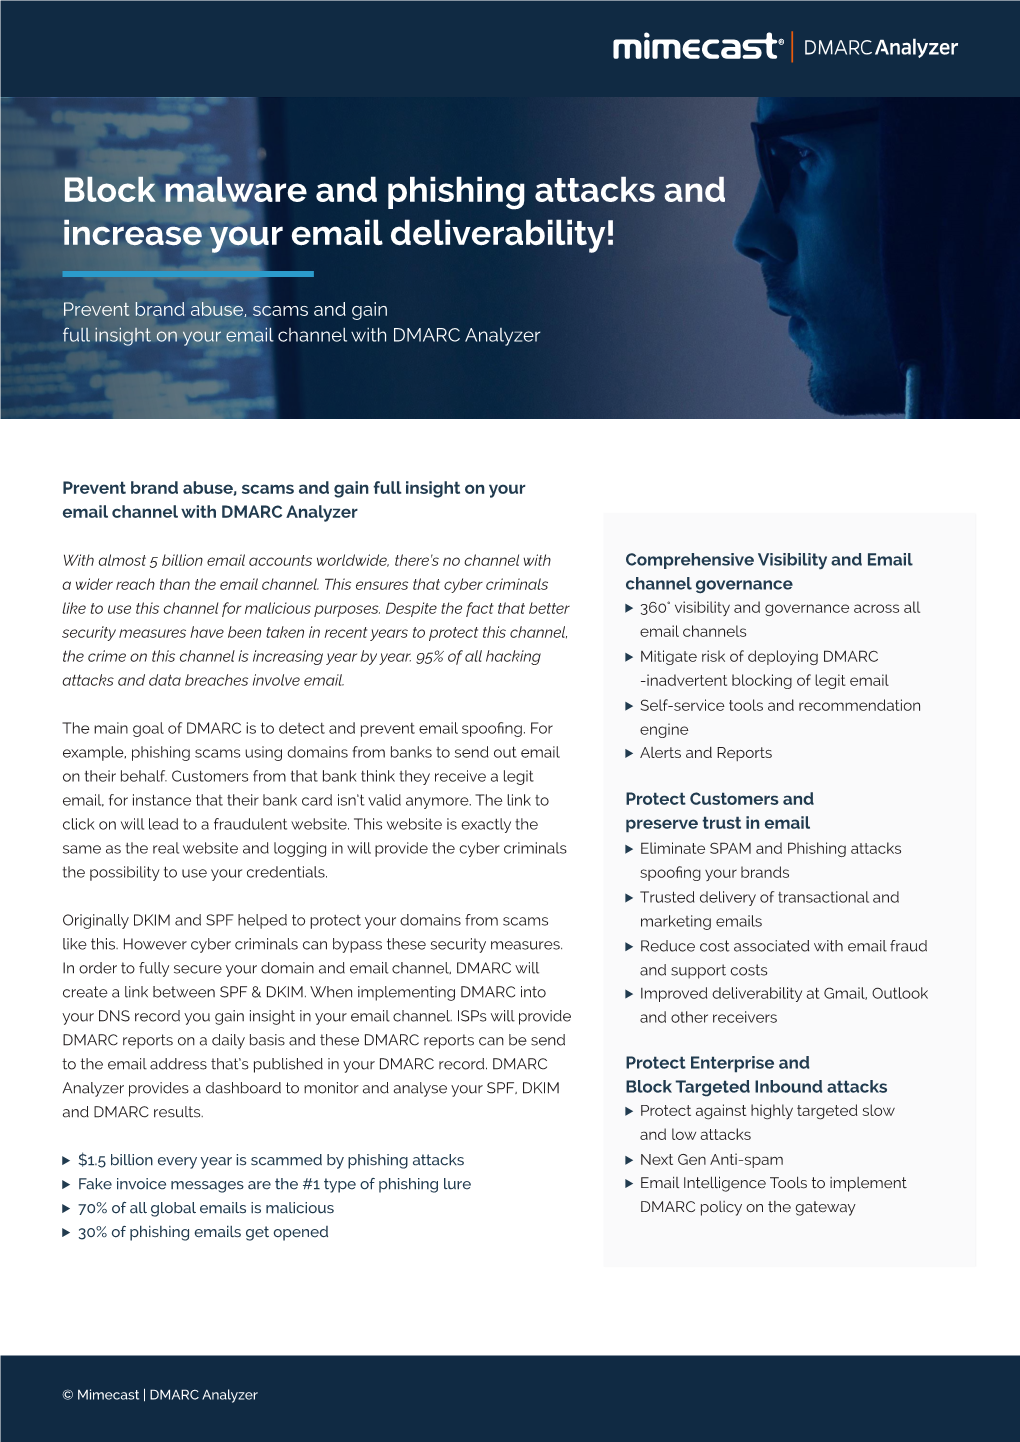 Block Malware and Phishing Attacks and Increase Your Email Deliverability!